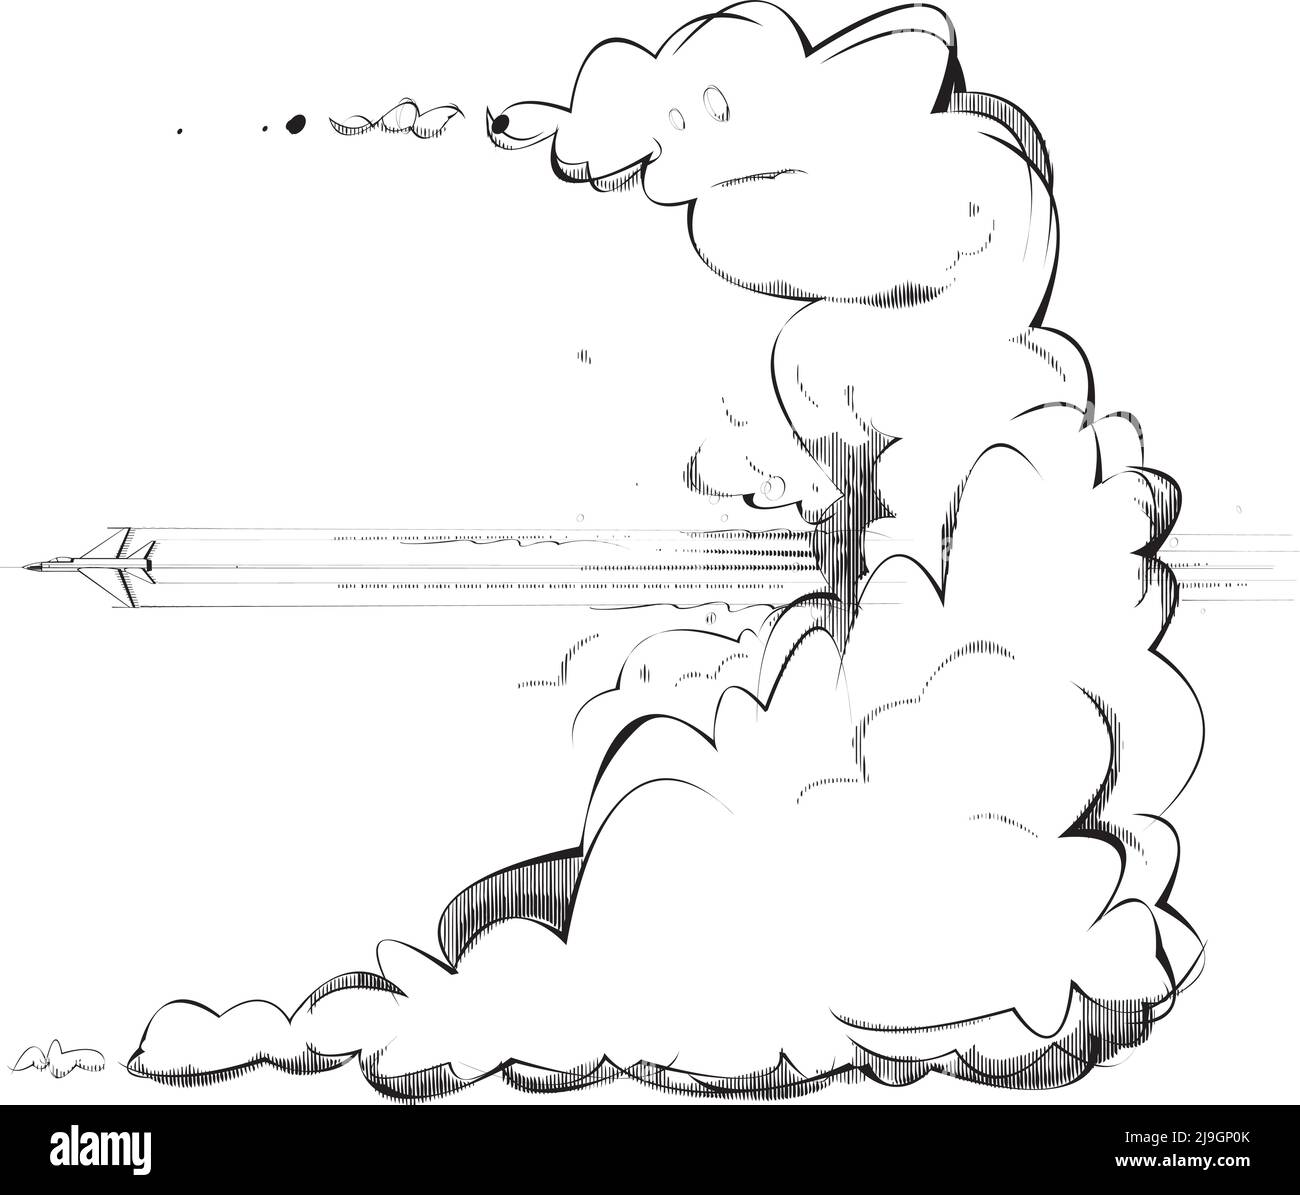 Big cloud is pierced by a jet plane Stock Vector